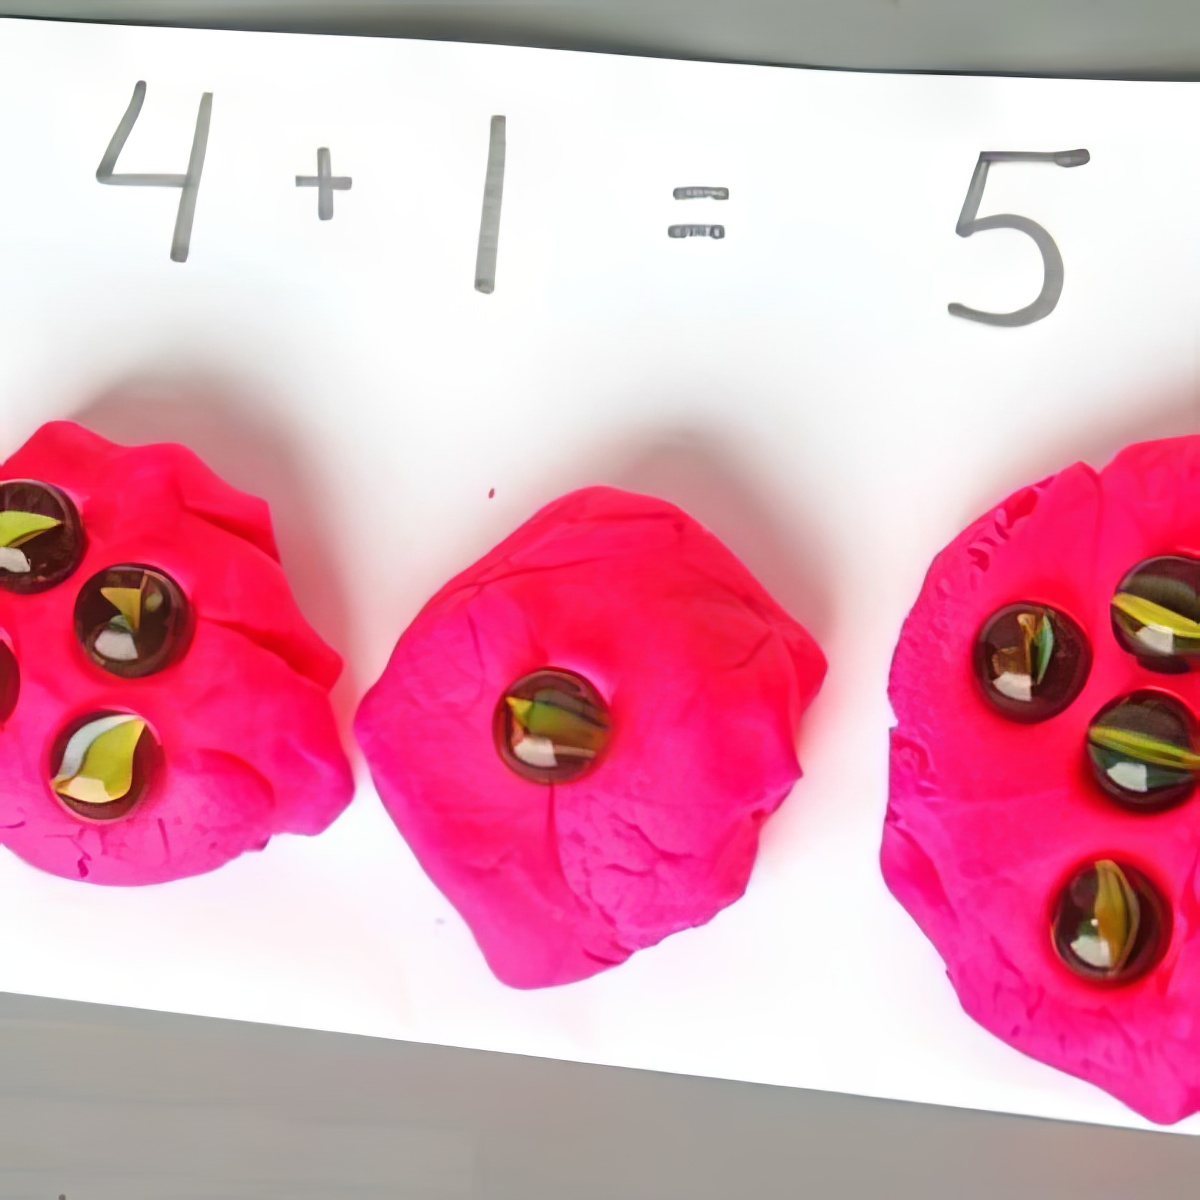 Math fun, boredom buster activities for 4-year-olds, playdoh and math for your toddler